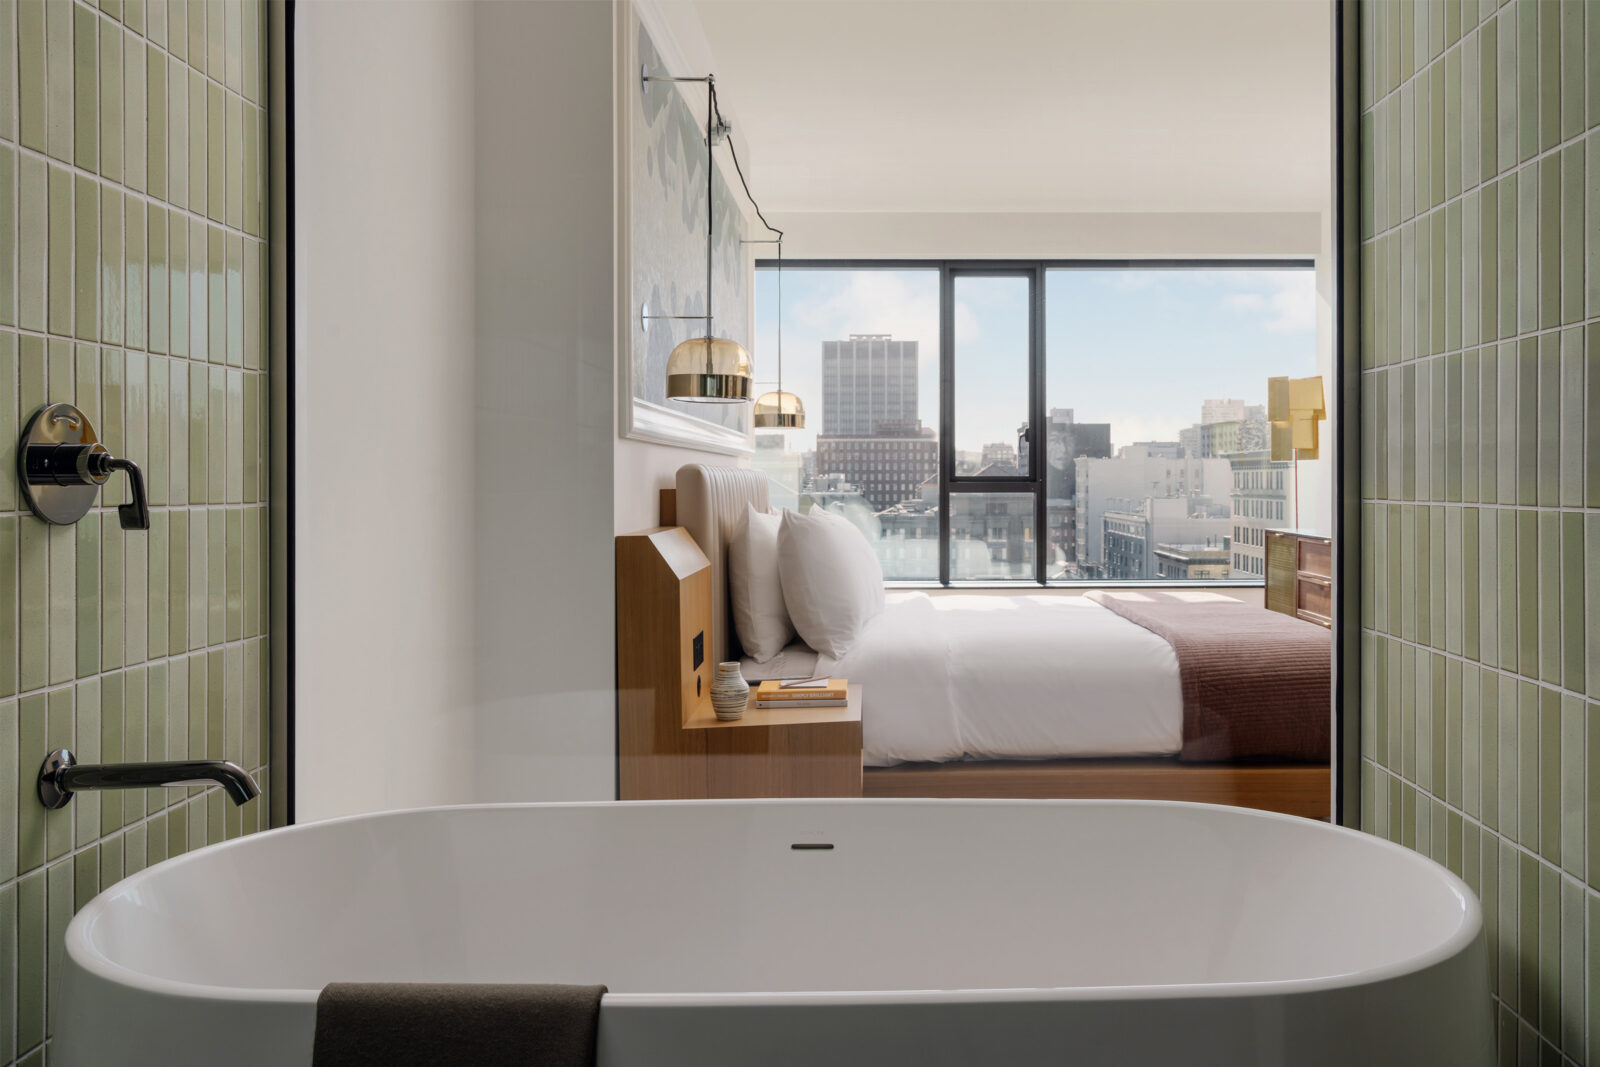 The room offers skyline views along with a soaking tub and a hotel bed.